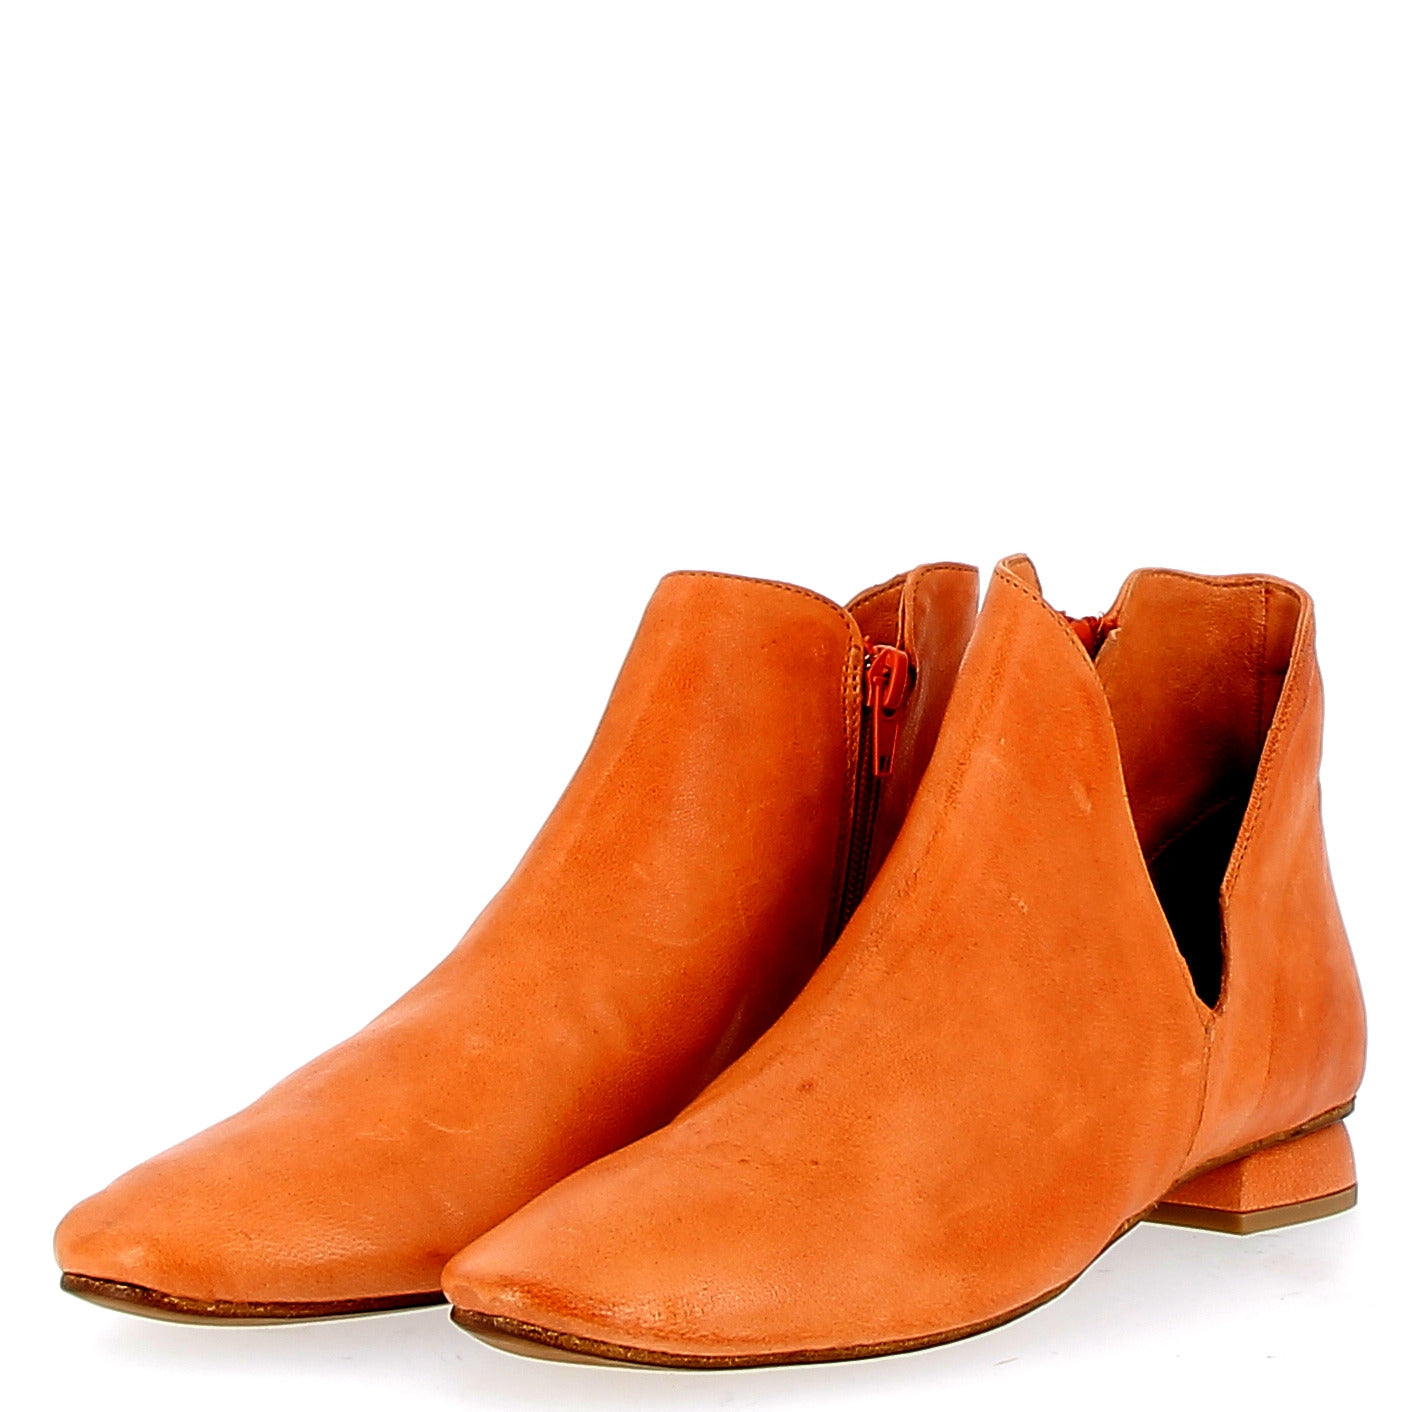 Orange leather open ankle boot